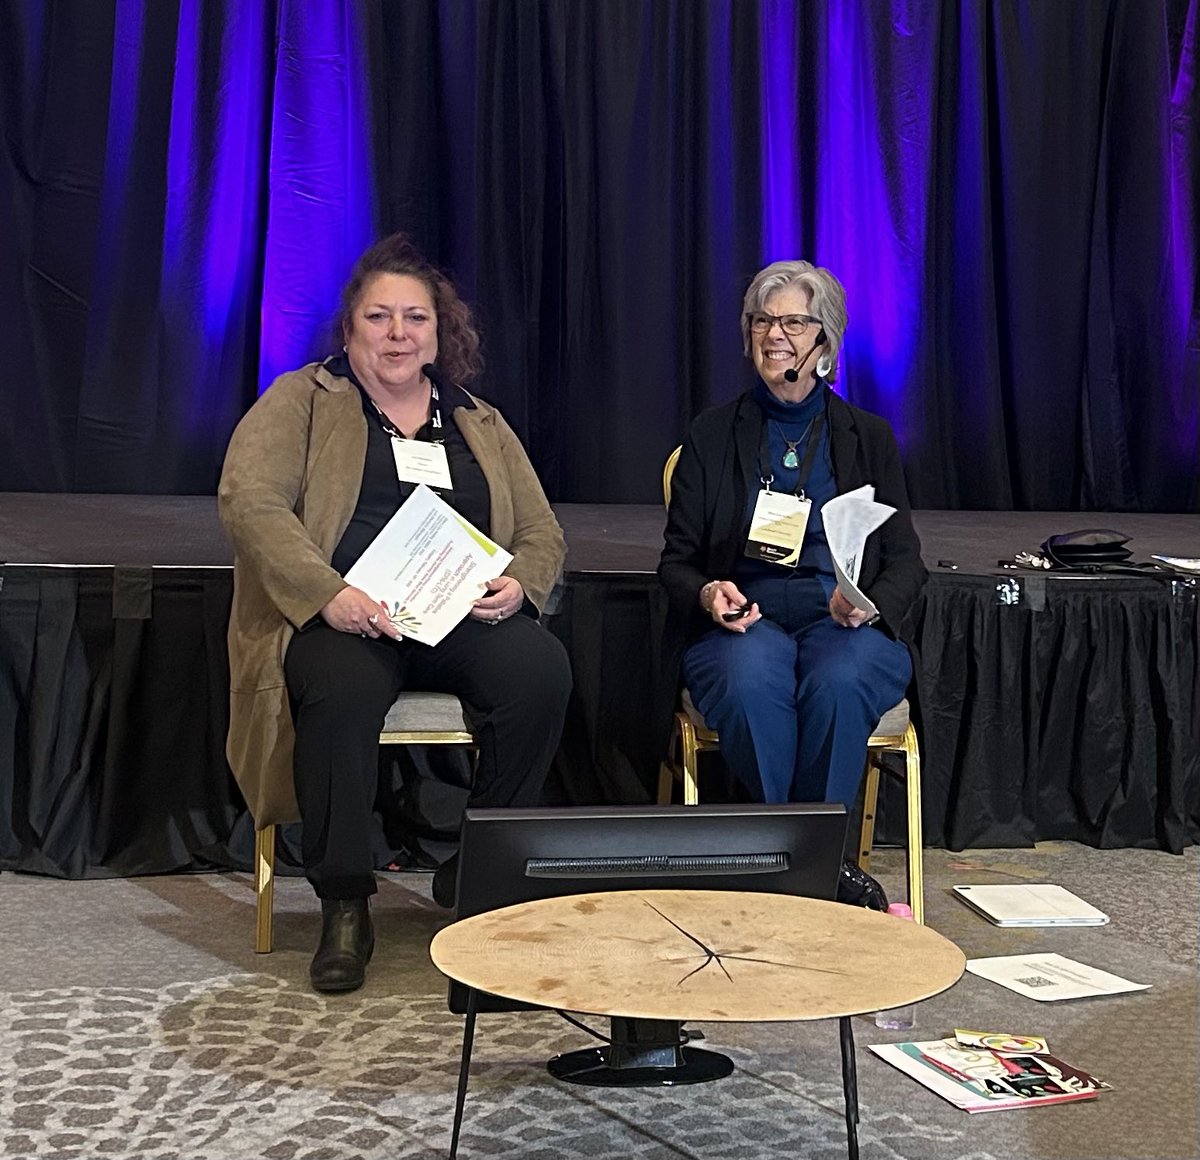 Always great to hear from Mary Lou Kelley & Lori Montour - speaking at the #AIPP about their work Strengthening the Palliative Approach in Long Term Care @spa_ltc